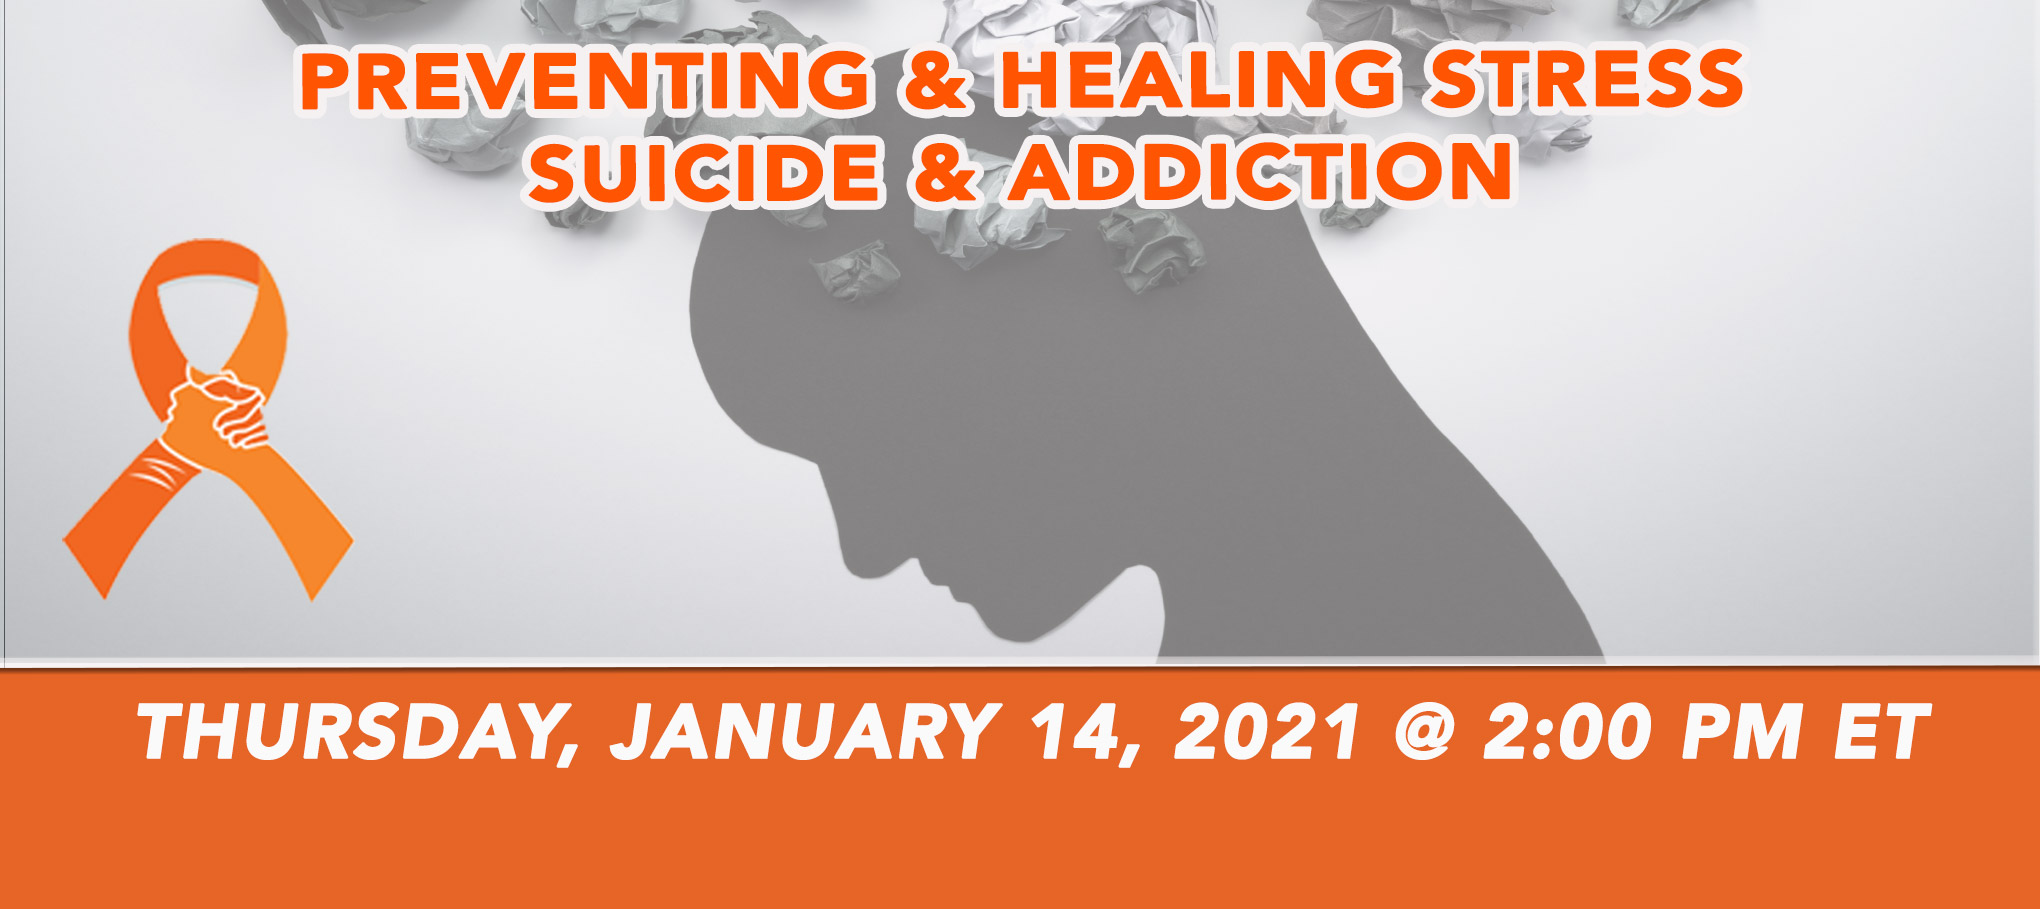 Addiction &amp; Suicide_Preventing&amp; Healing Stress